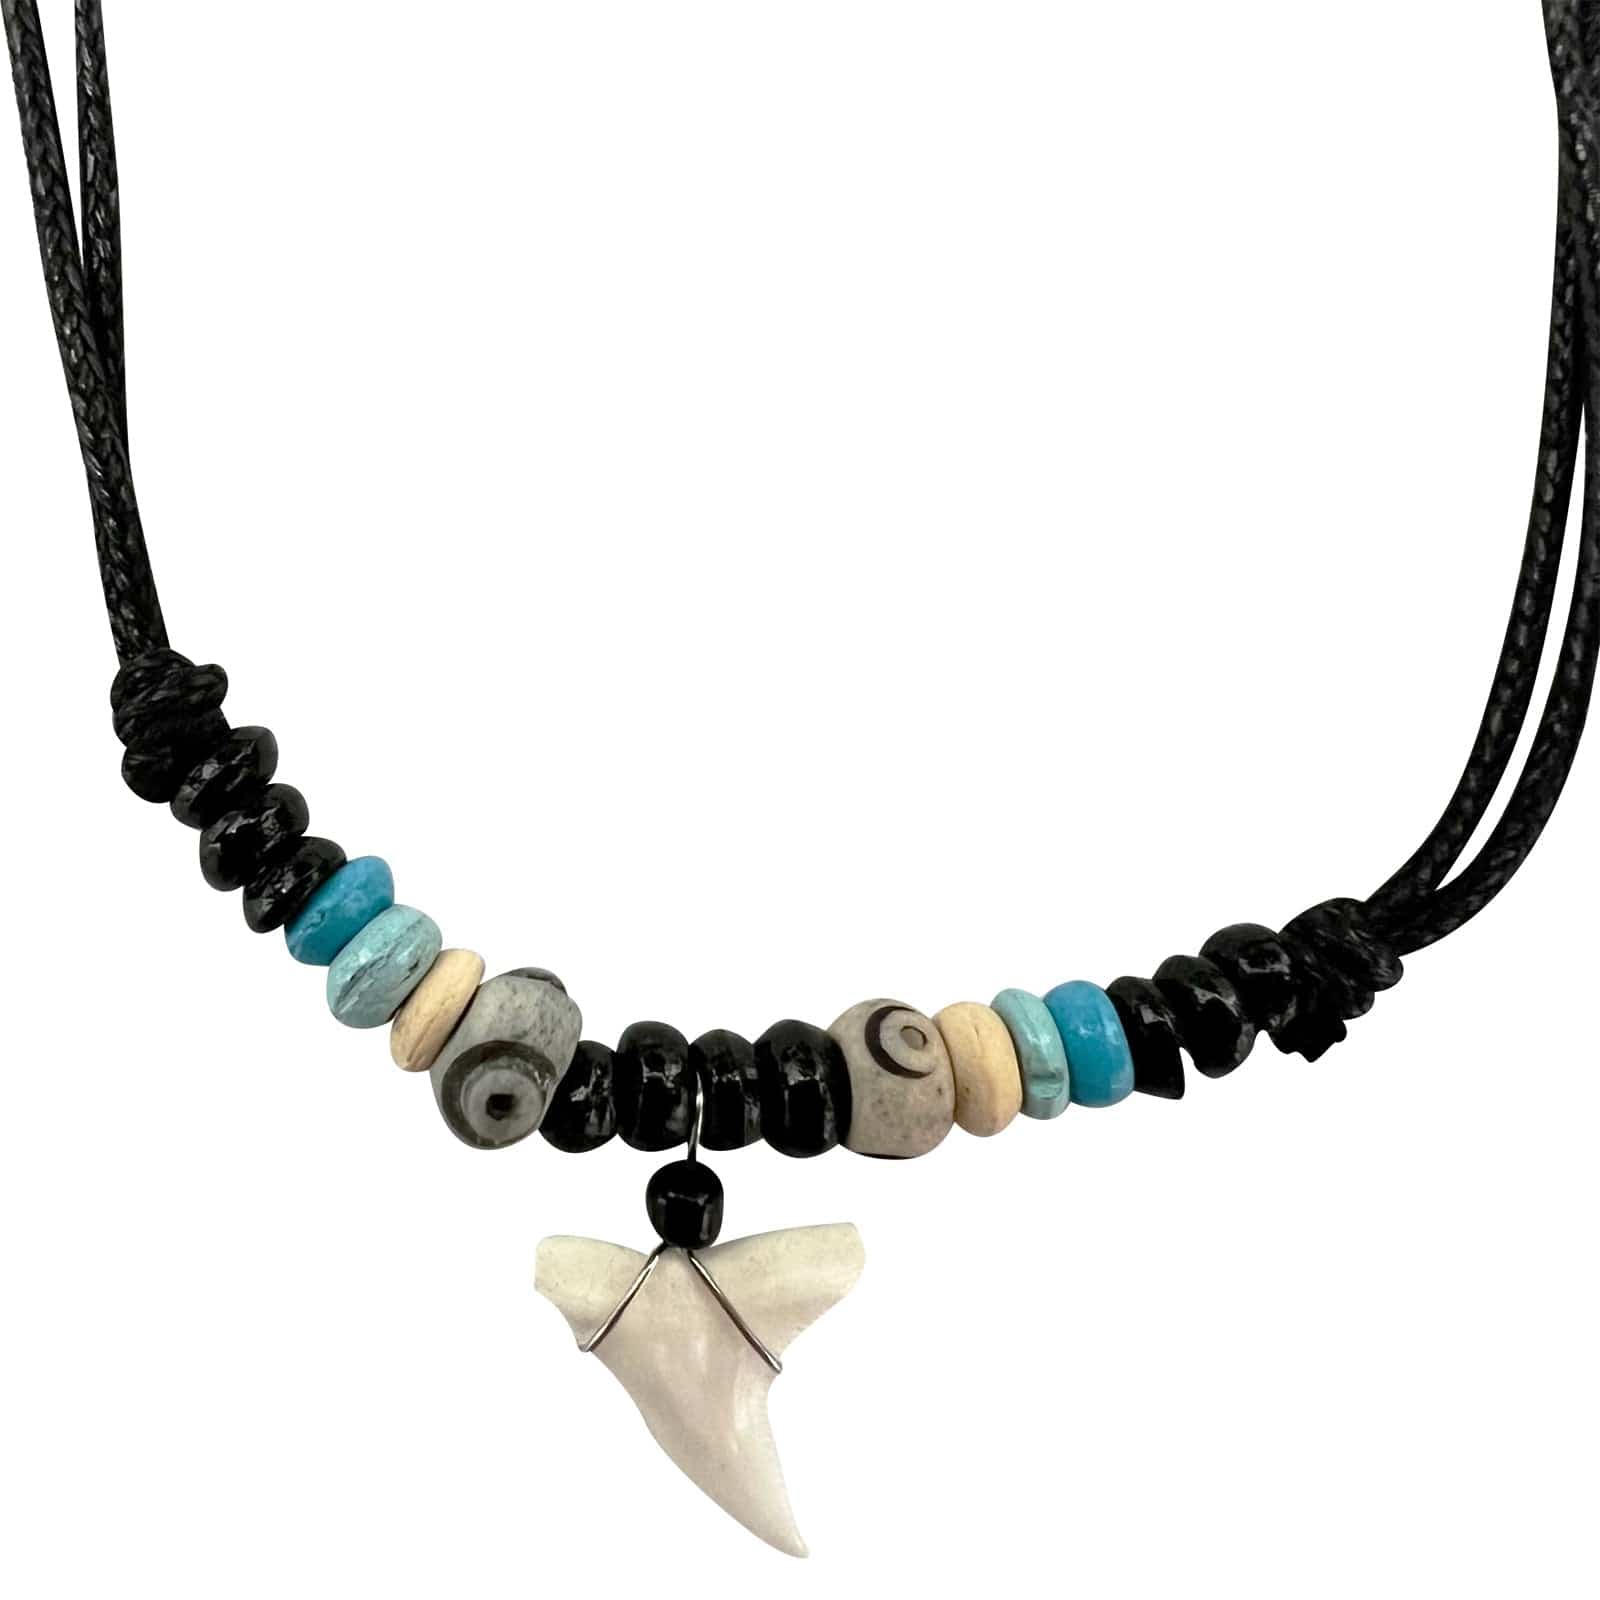 Imitation Resin Shark Tooth Pendant Necklace Wood Beads Cord Chain Mens Ladies Costume Jewellery